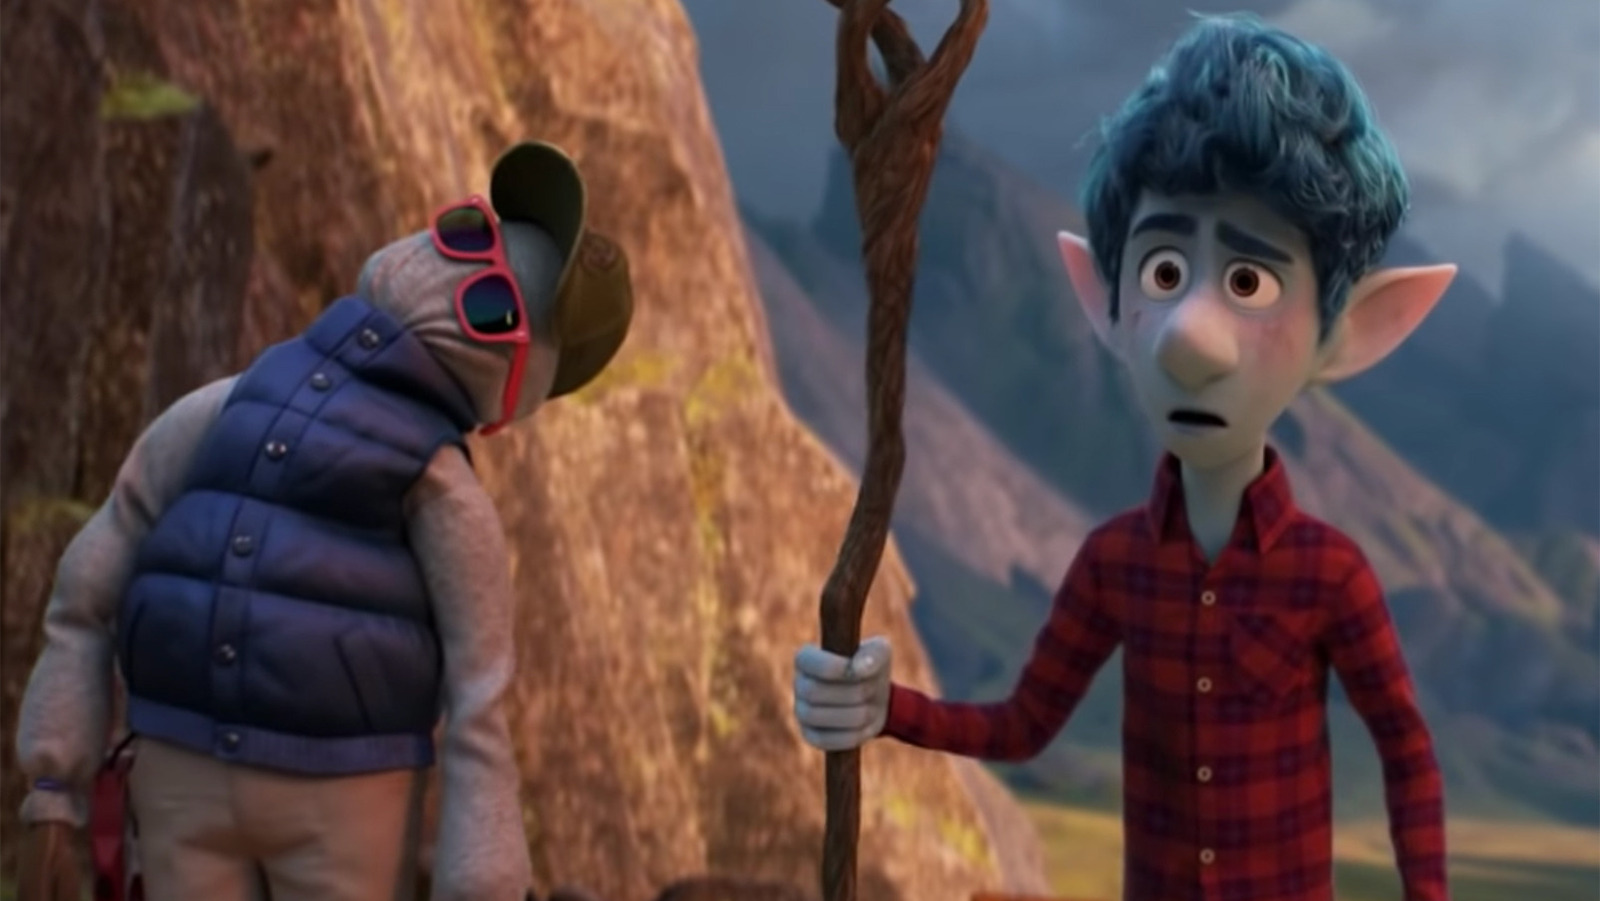 The Morning Watch: How Pixar Creates Animated Clothes, Analyzing Serial  Killers In Movies & More